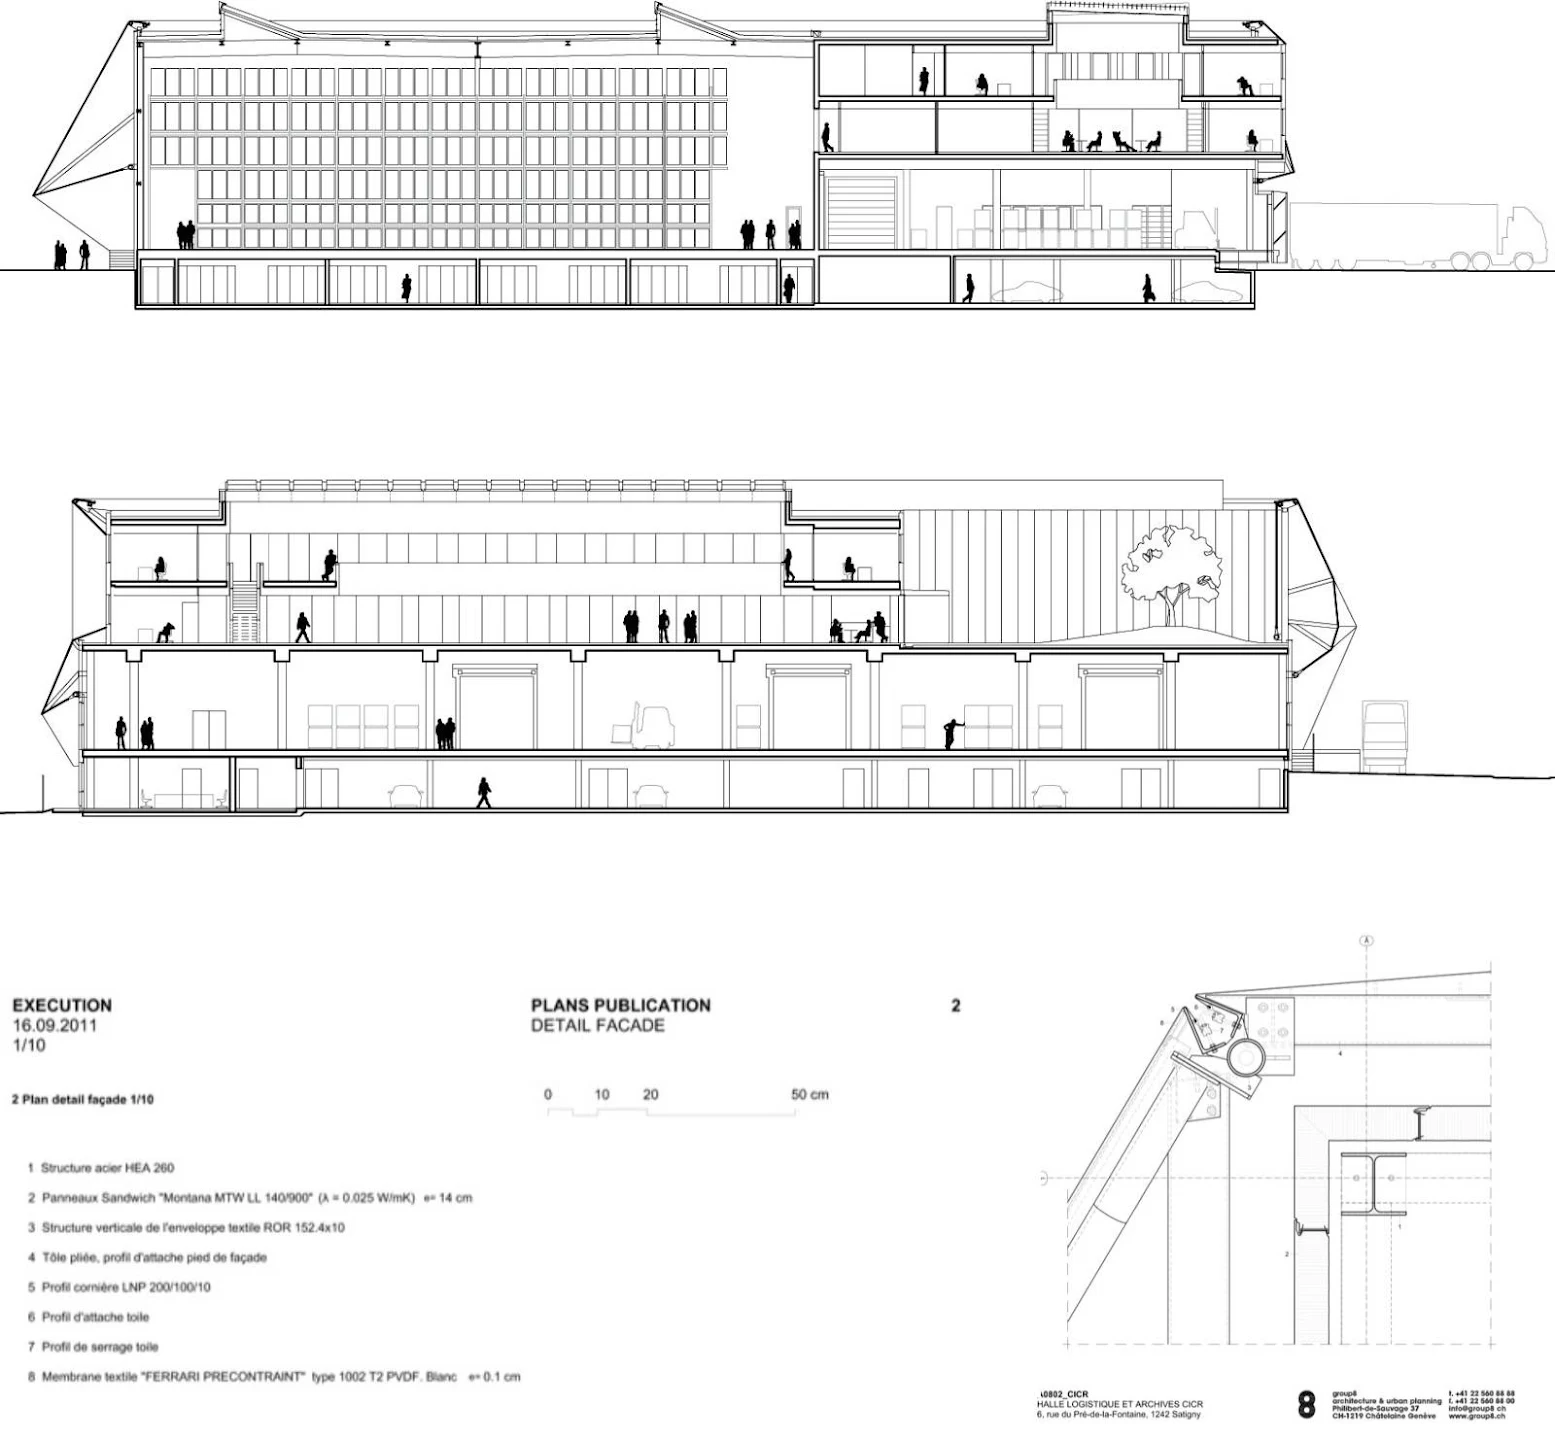 ICRC Logistics Complex by group8